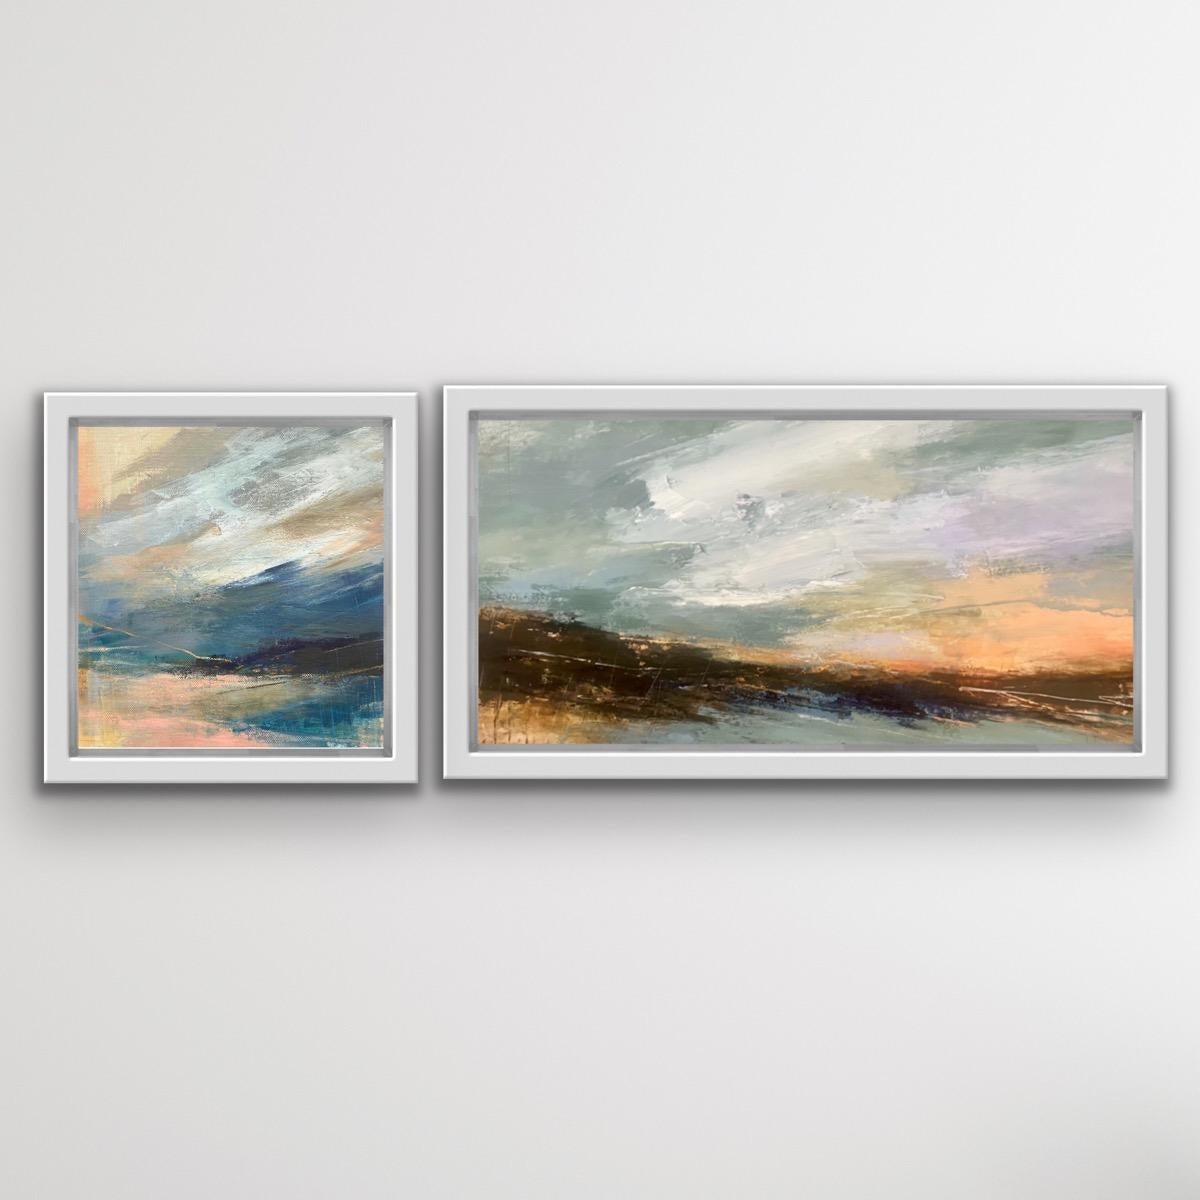 Luisa Holden Landscape Painting - Dusky Shore and Peach Panorama Diptych